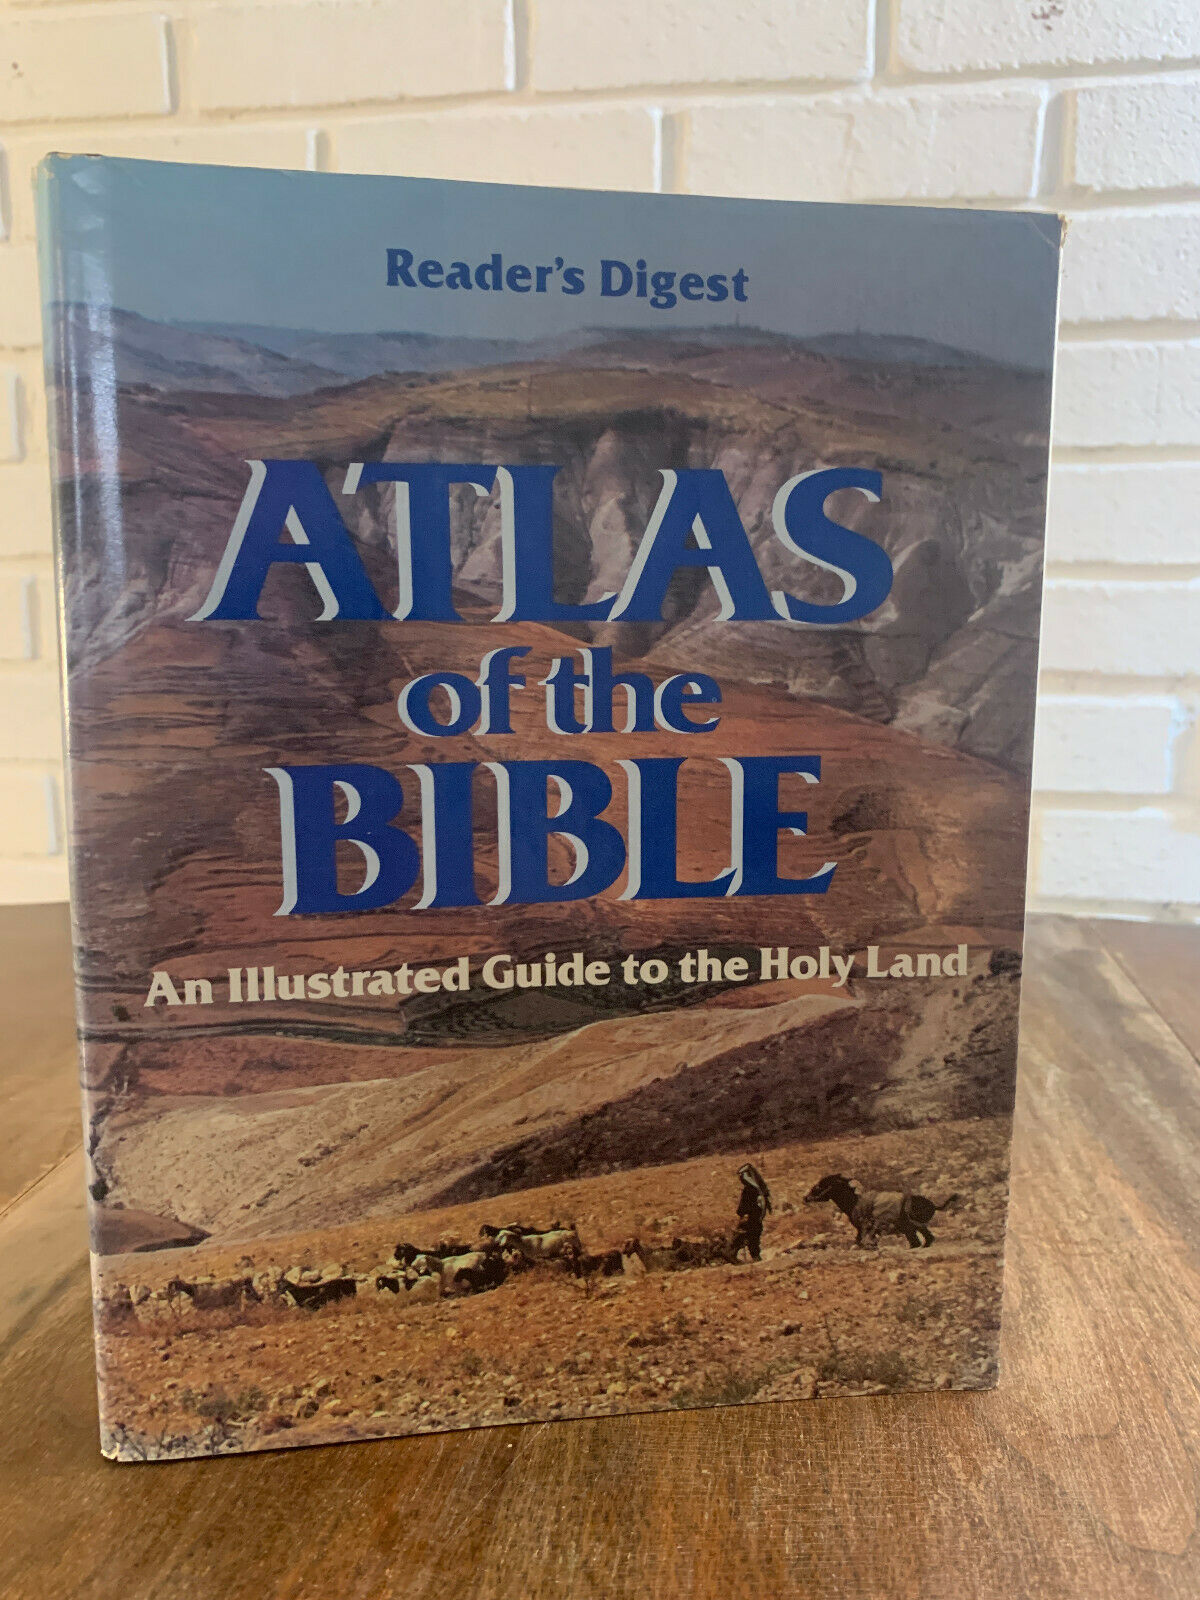 Atlas of the Bible An Illustrated Guide to the Holy Land, Reader's Digest